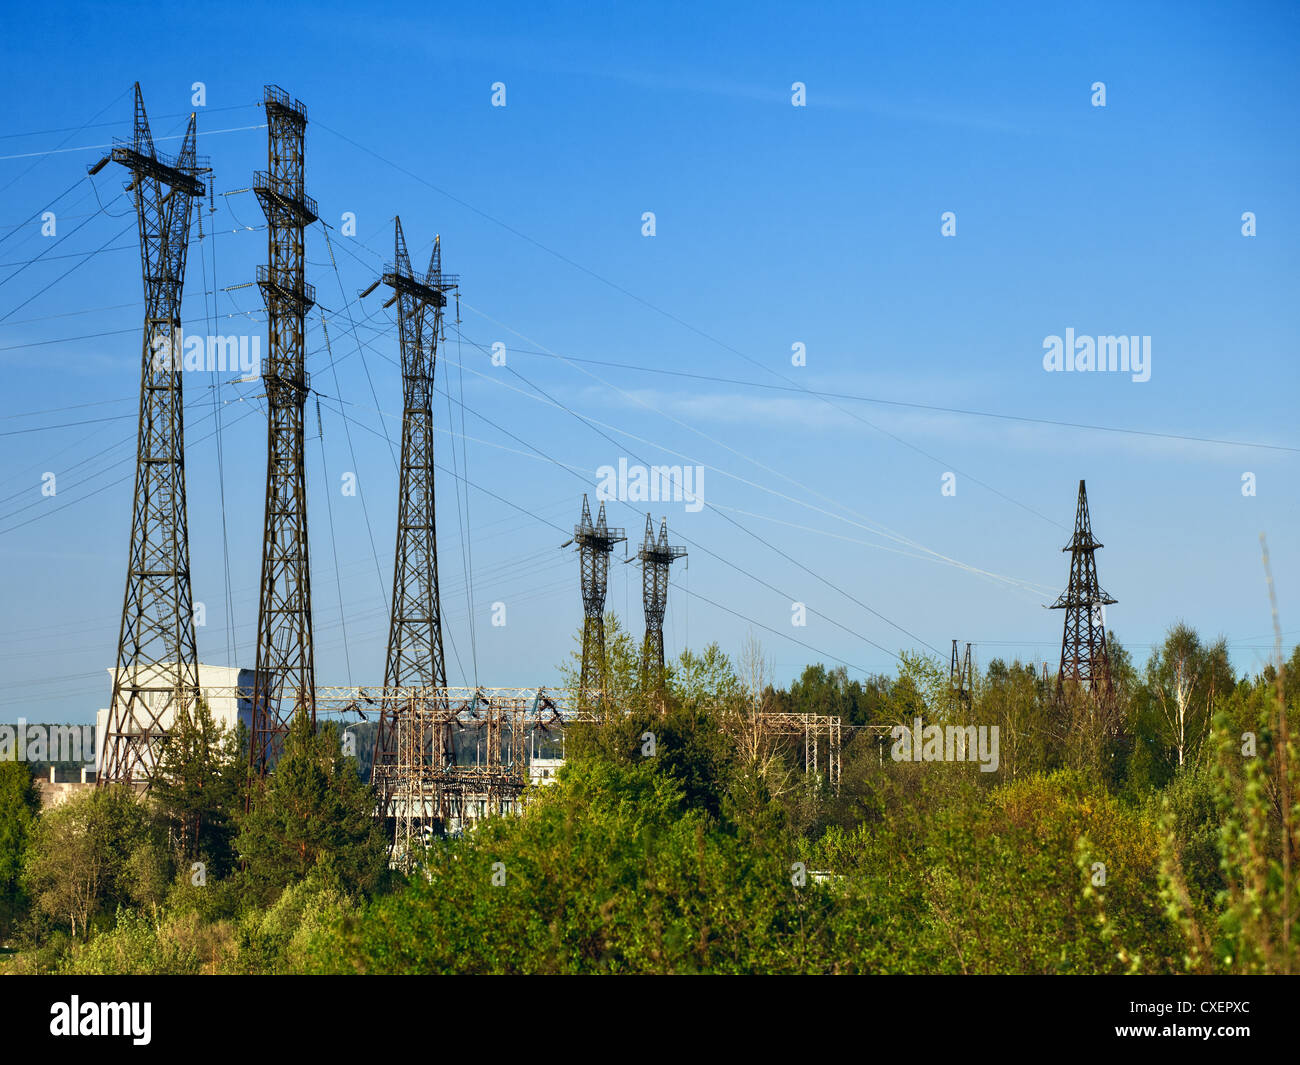 Substation in Forest Stock Photo